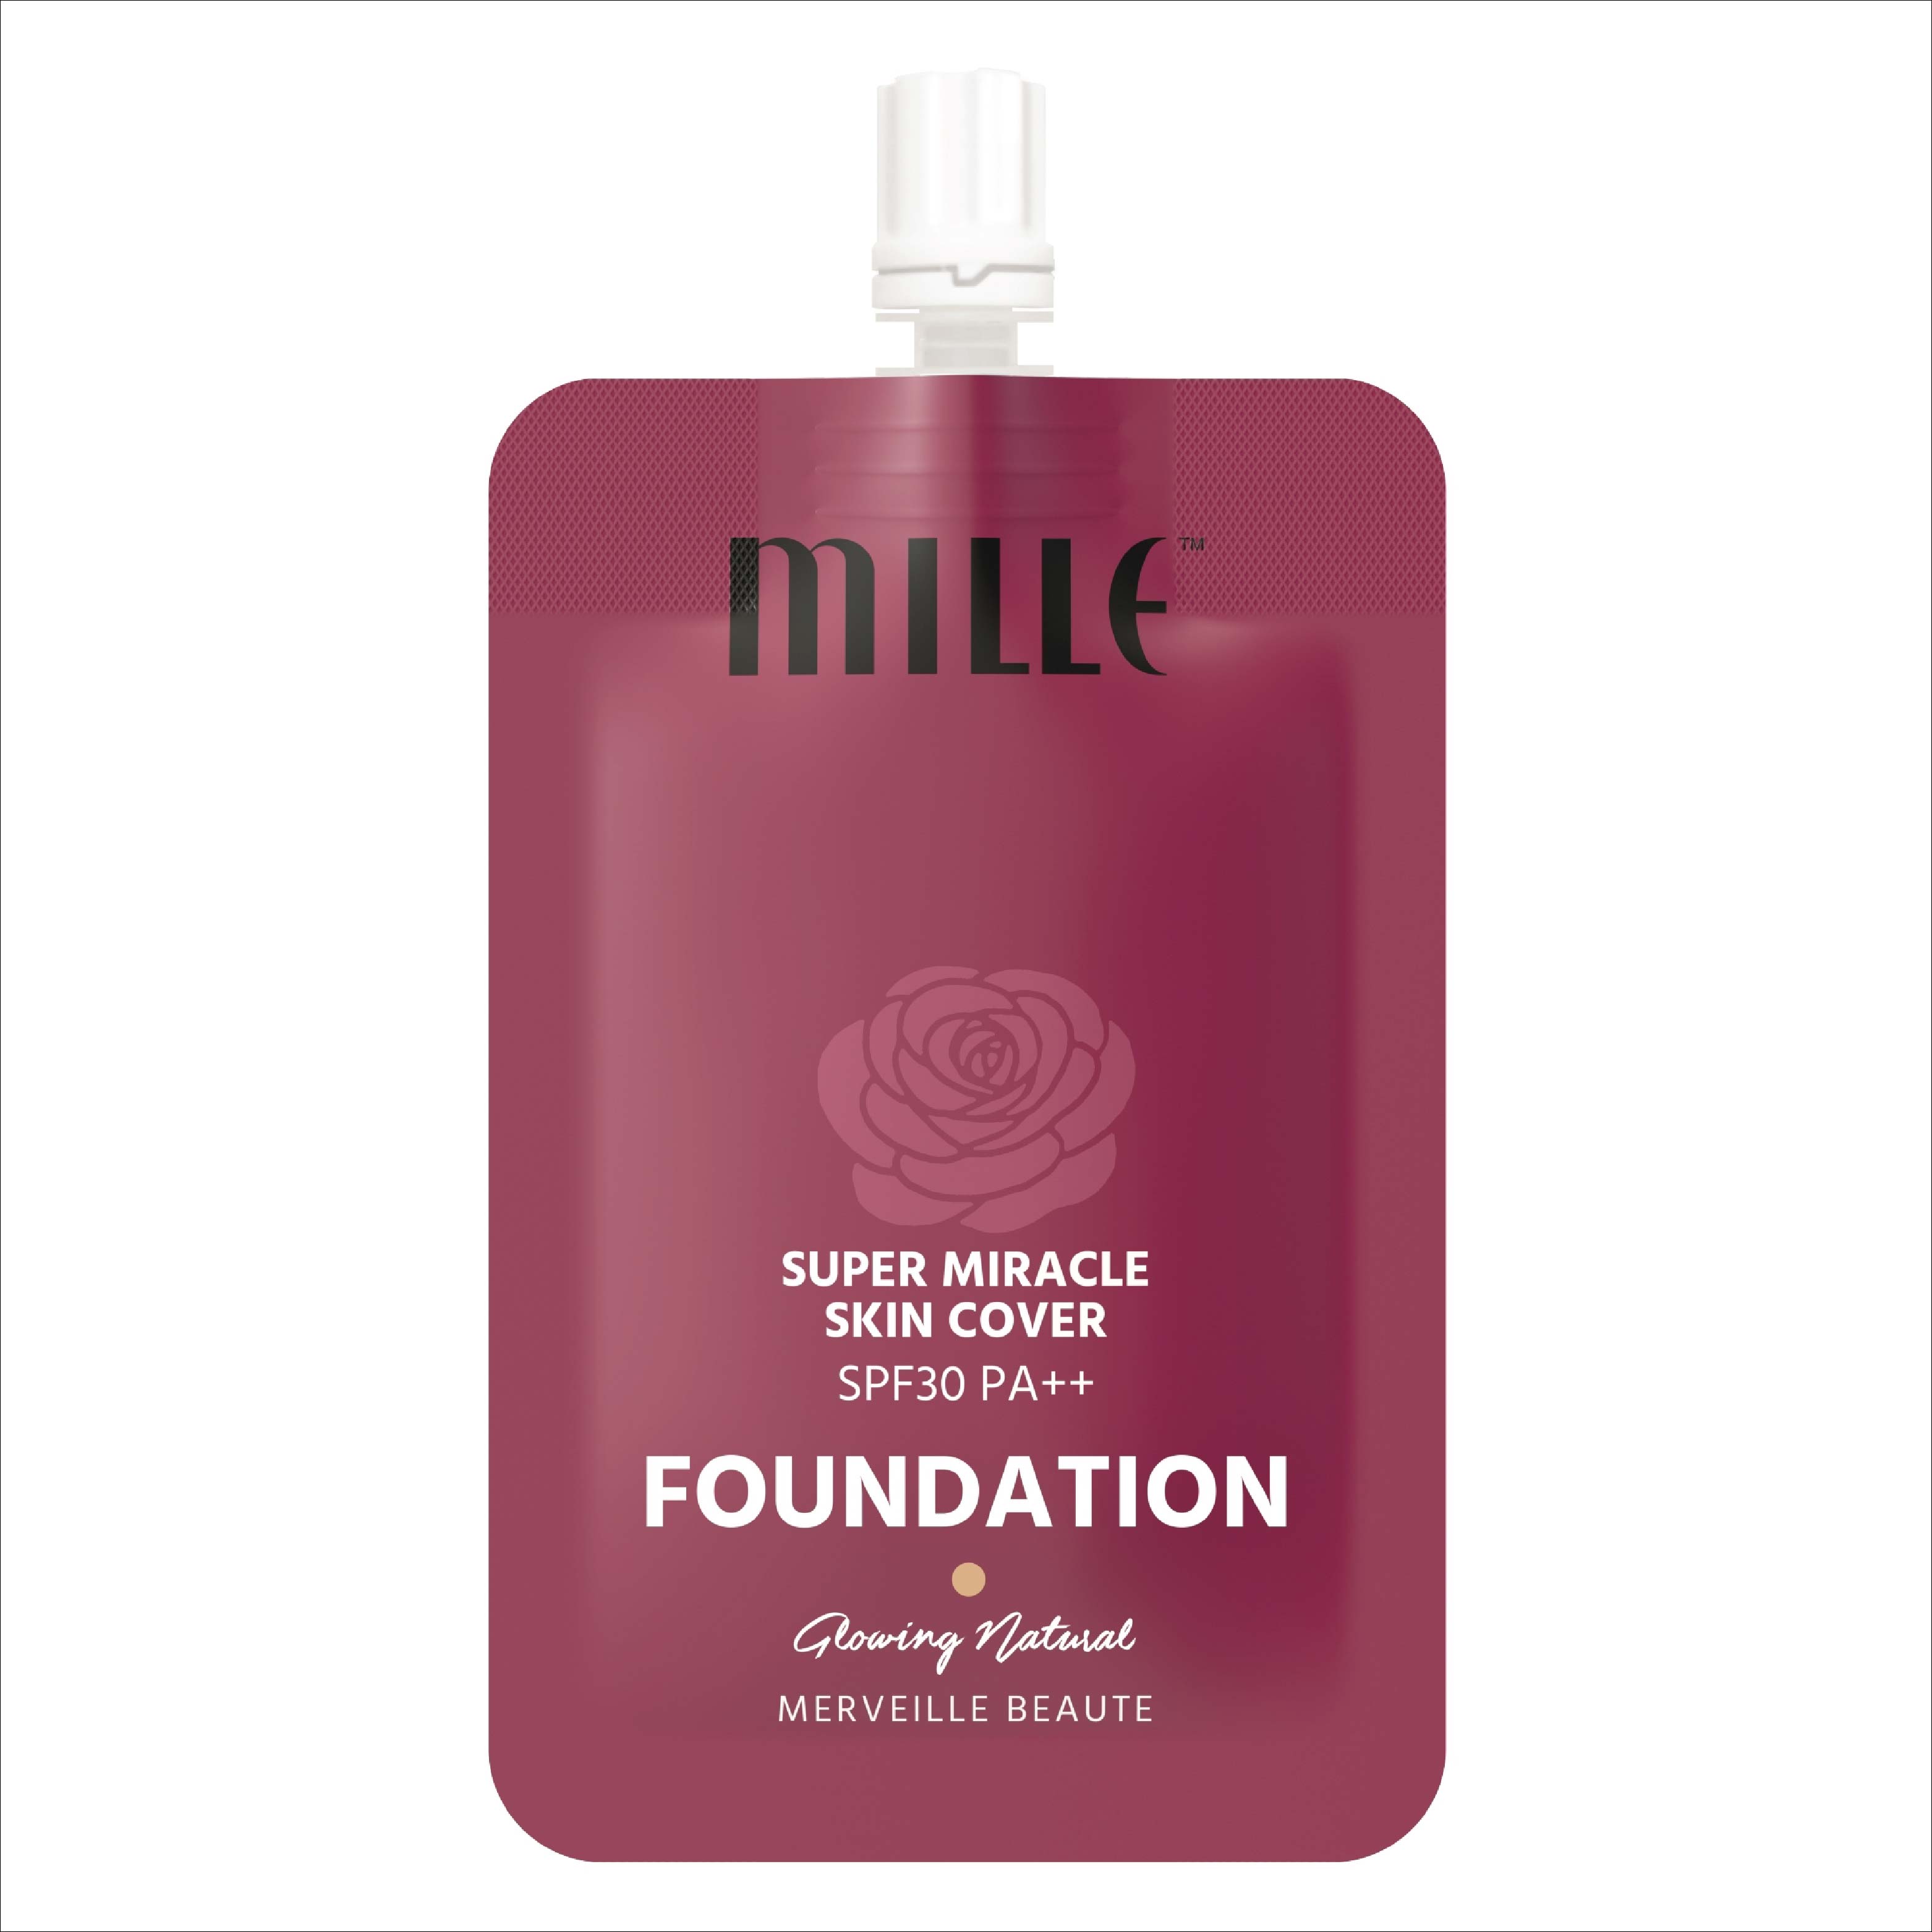 MILLE Super Miracle Skin Cover Foundation